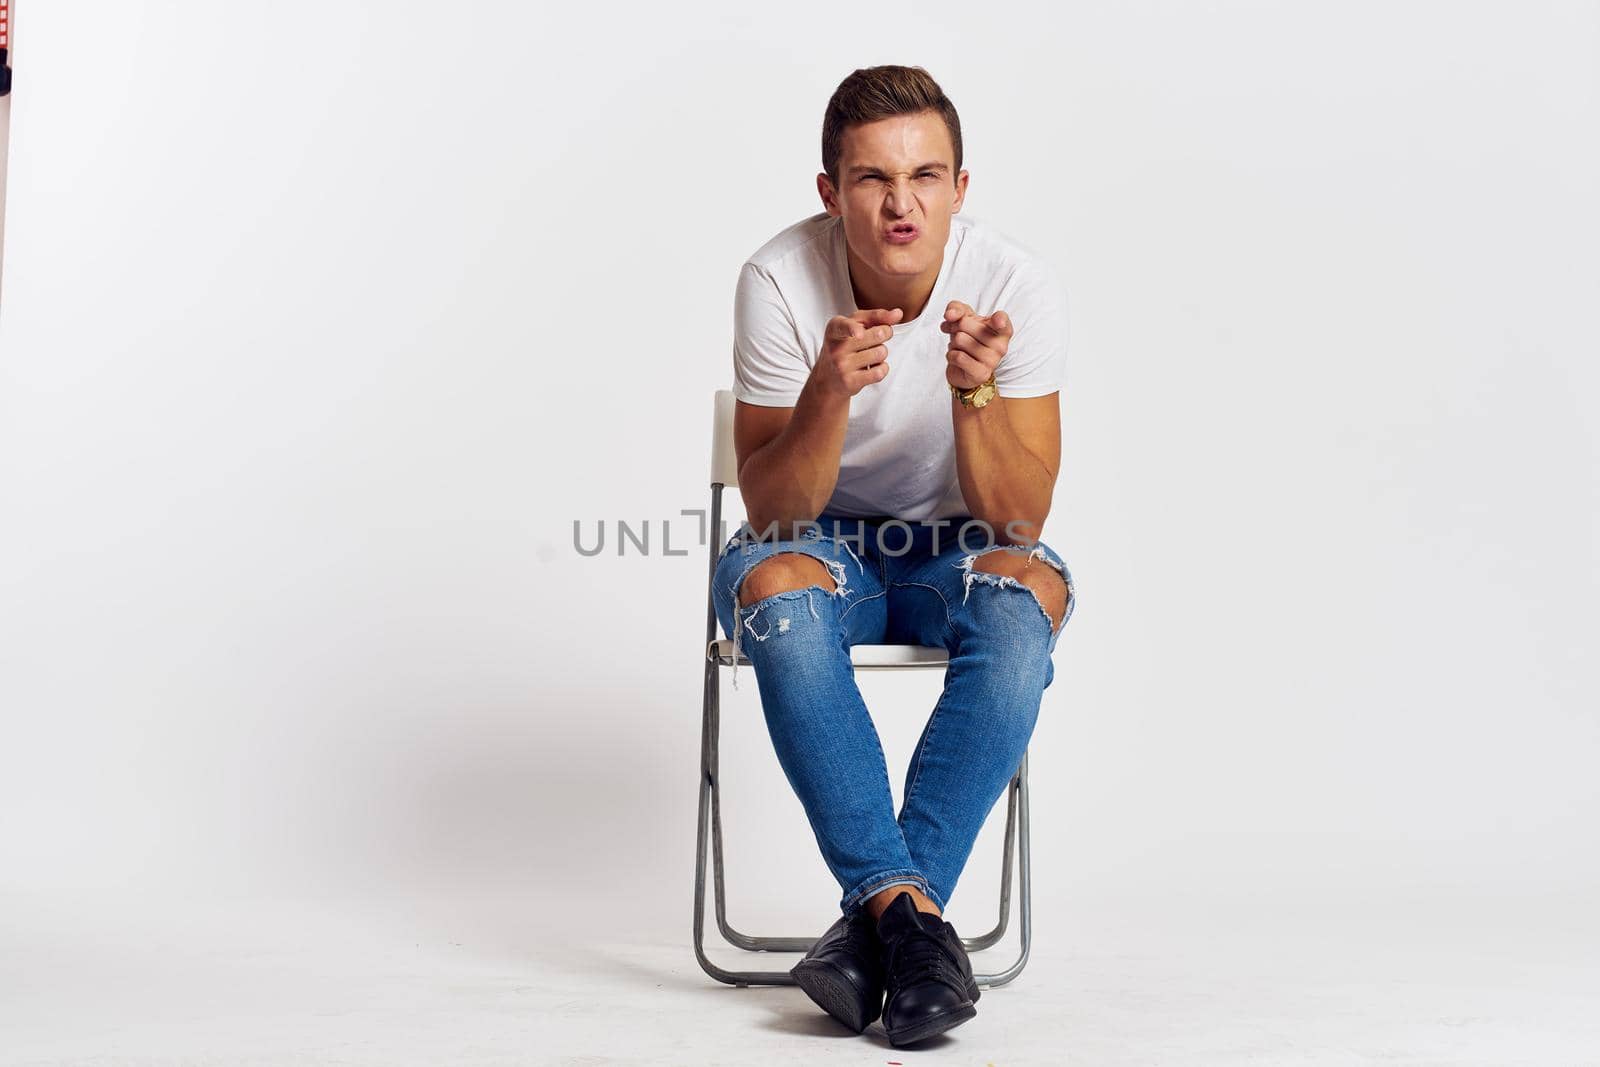 Man on a chair indoors torn jeans white t-shirt handsome face model light background. High quality photo